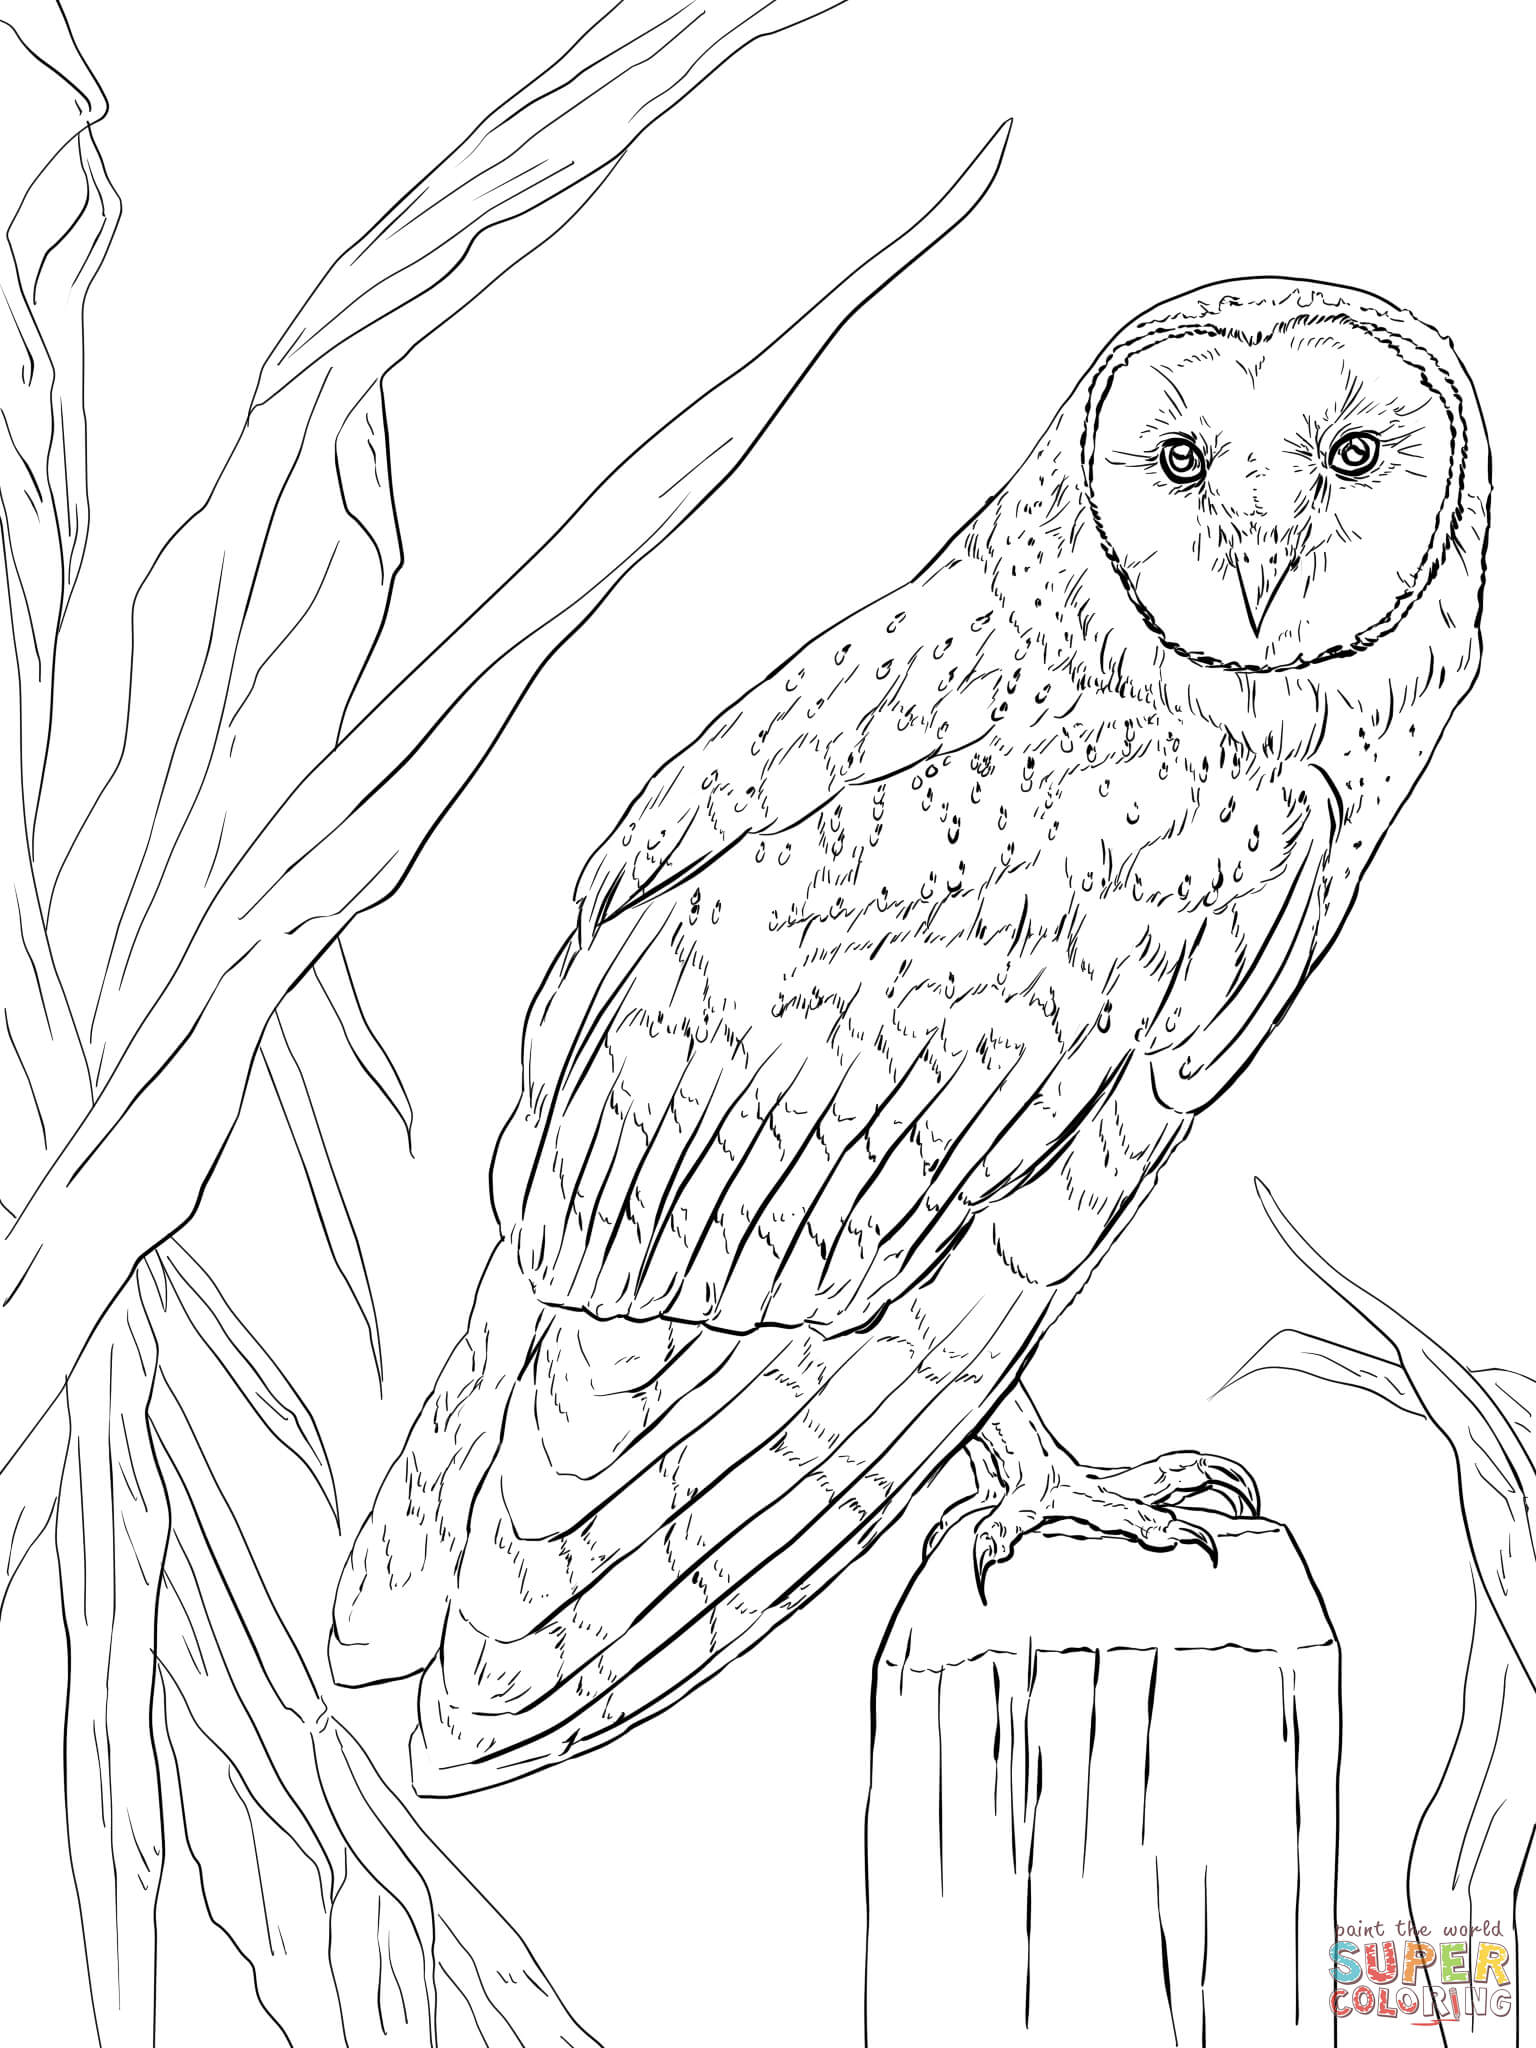 Barn owl coloring page free printable coloring pages